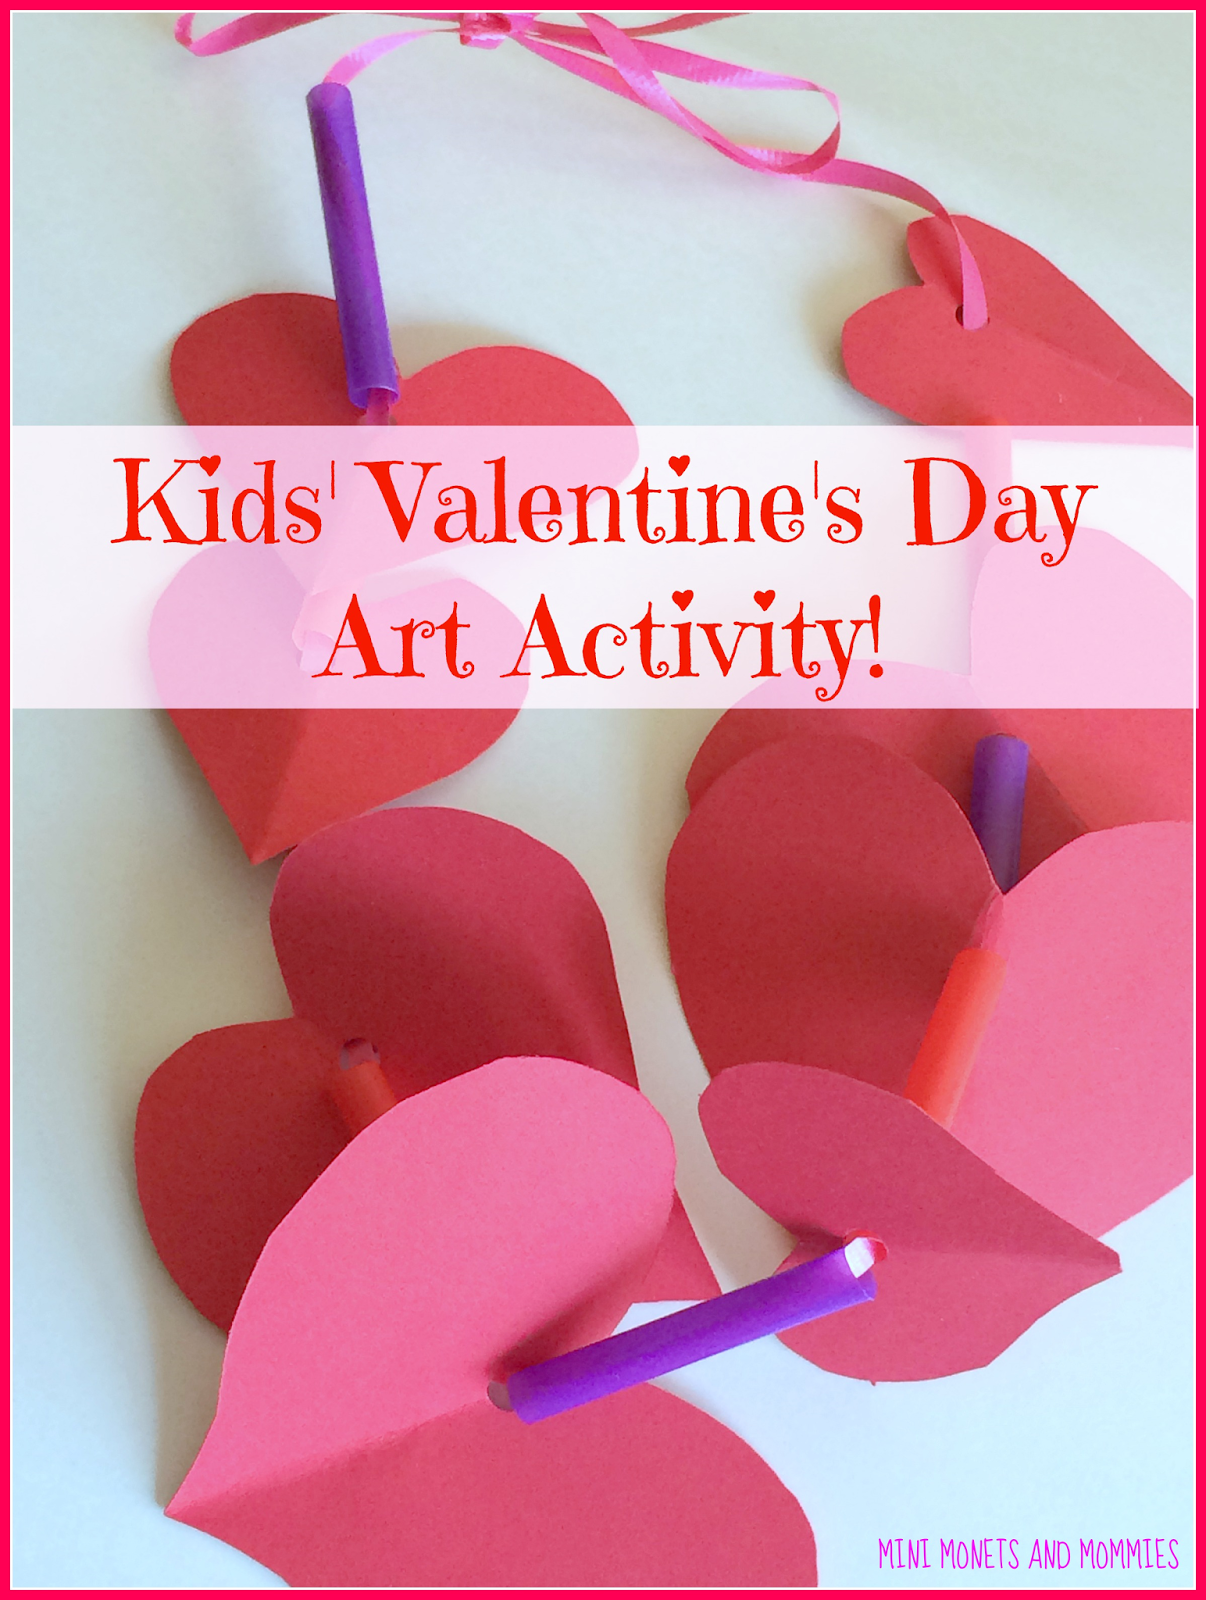 Valentine's threading and lacing activities